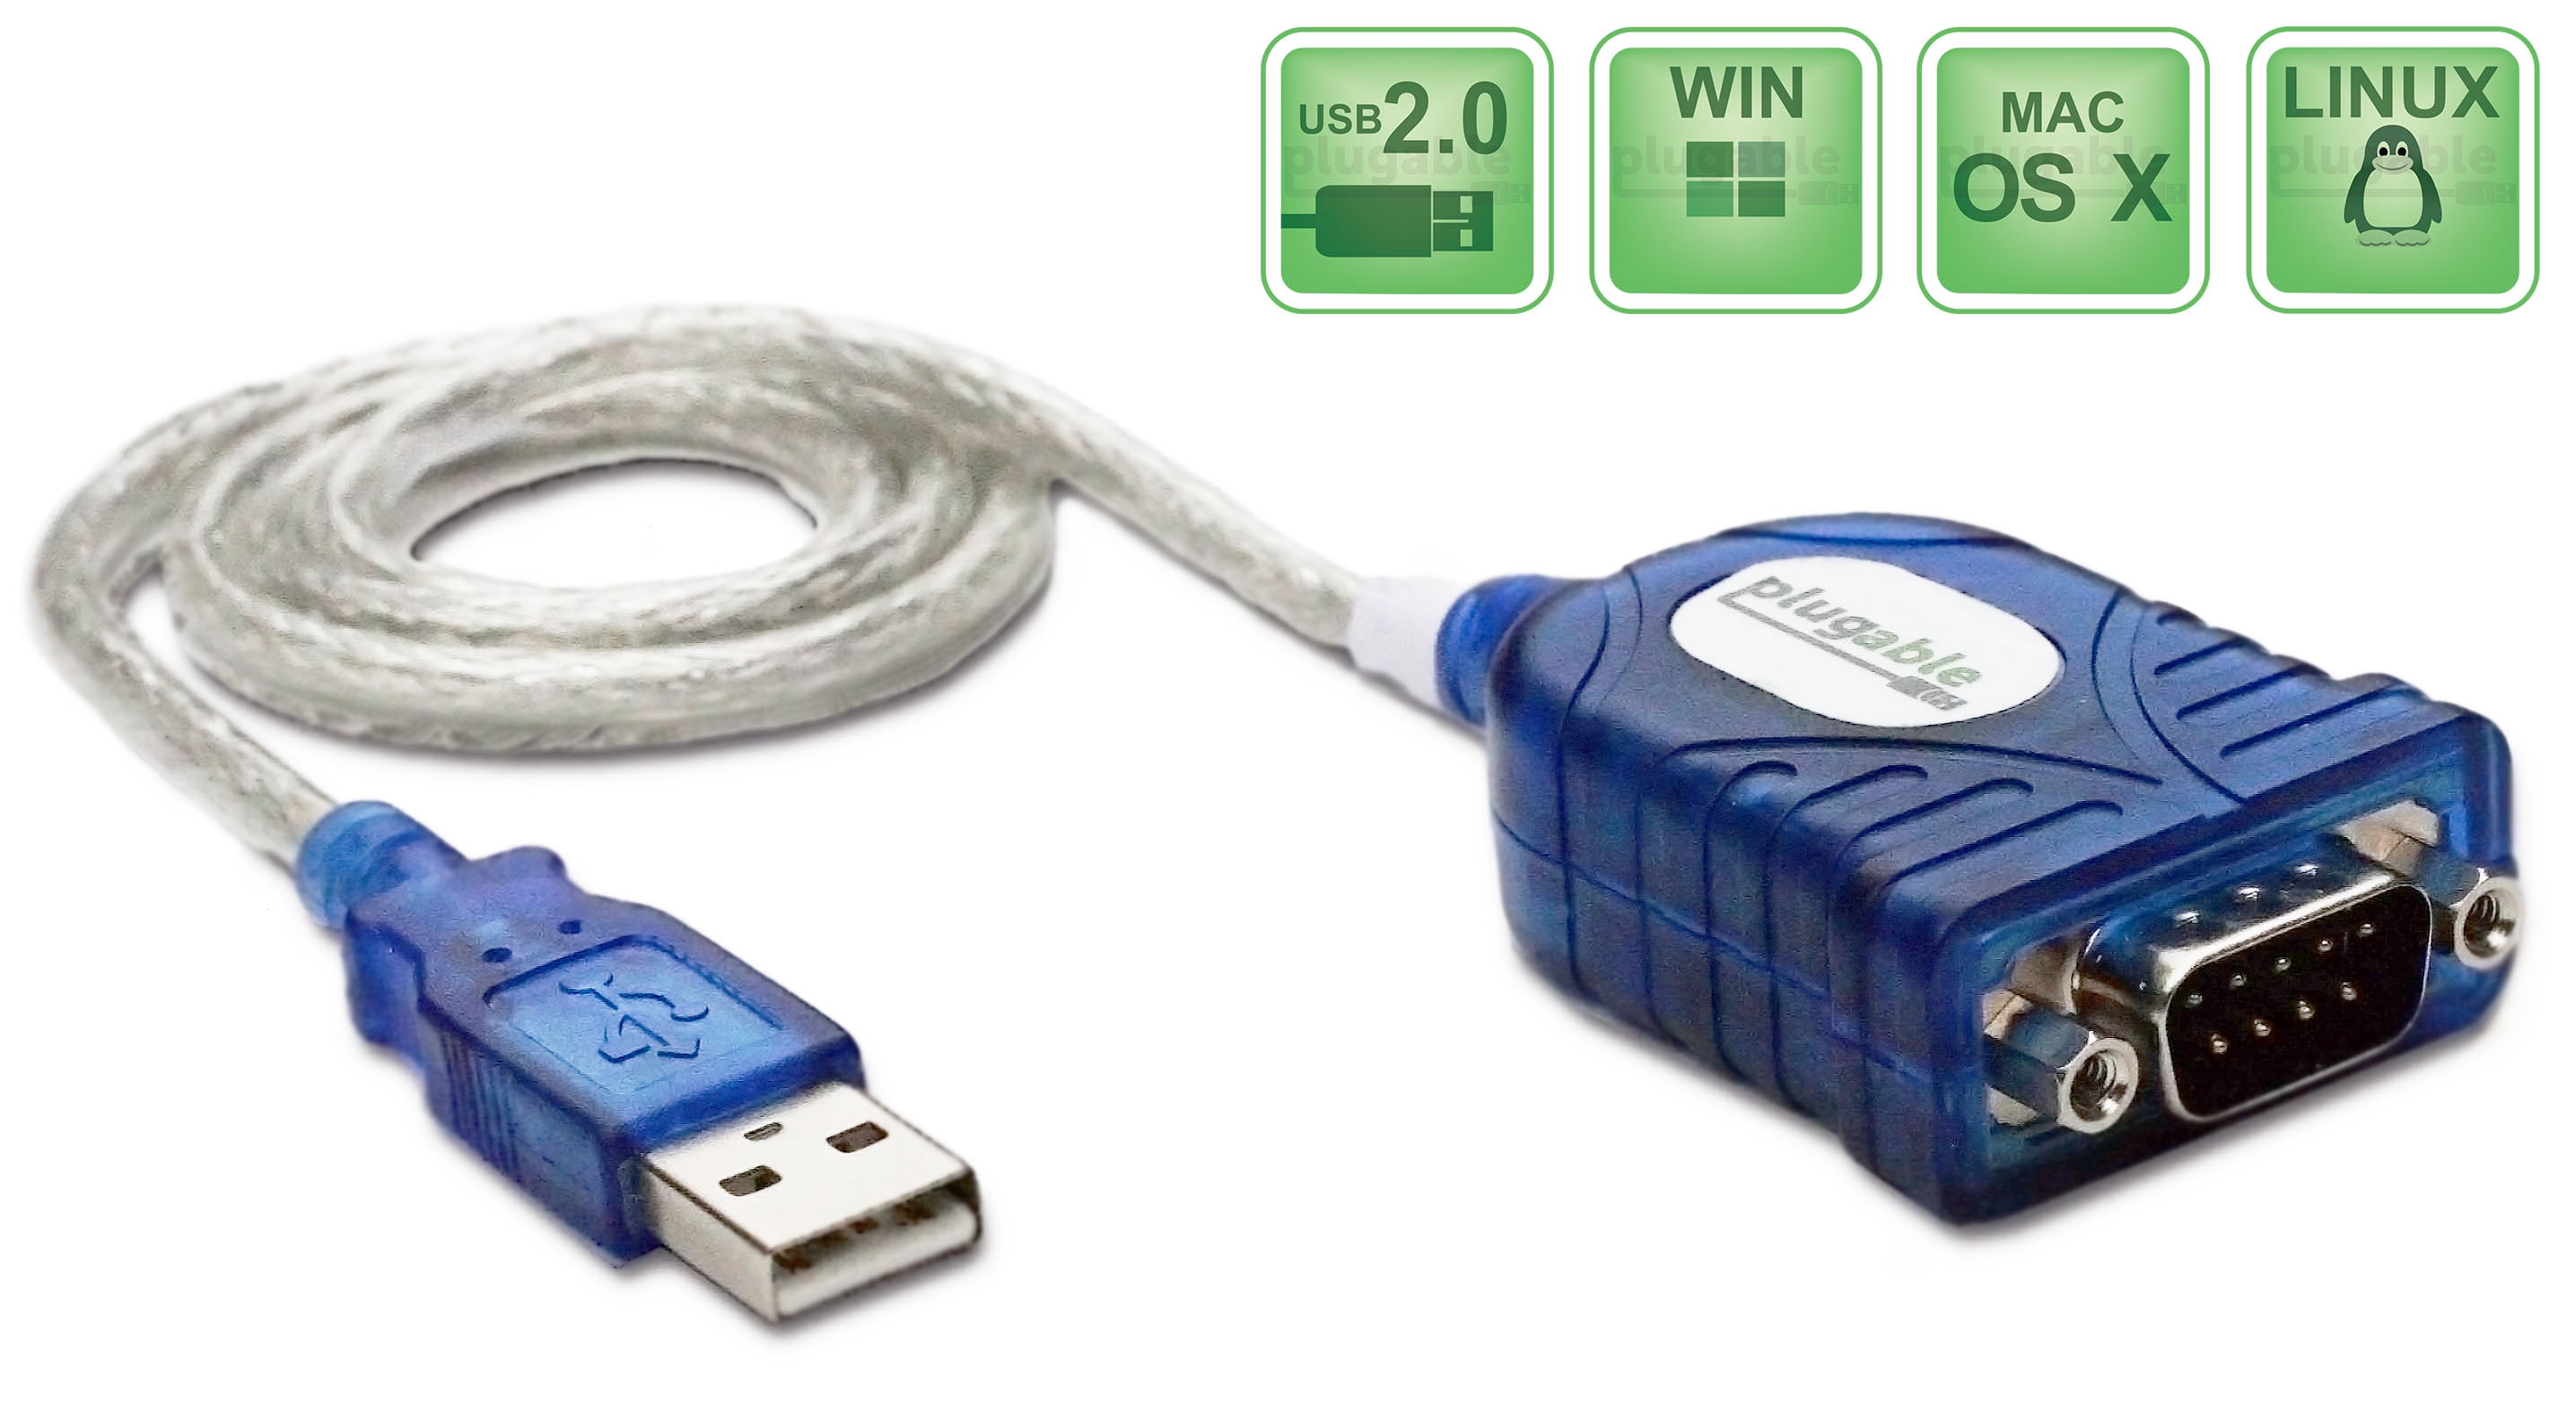 Plugable USB to Serial with Windows, Mac, Linux (RS-232\DB9 DTE Male Connector, Prolific Rev. D Chipset) - Walmart.com